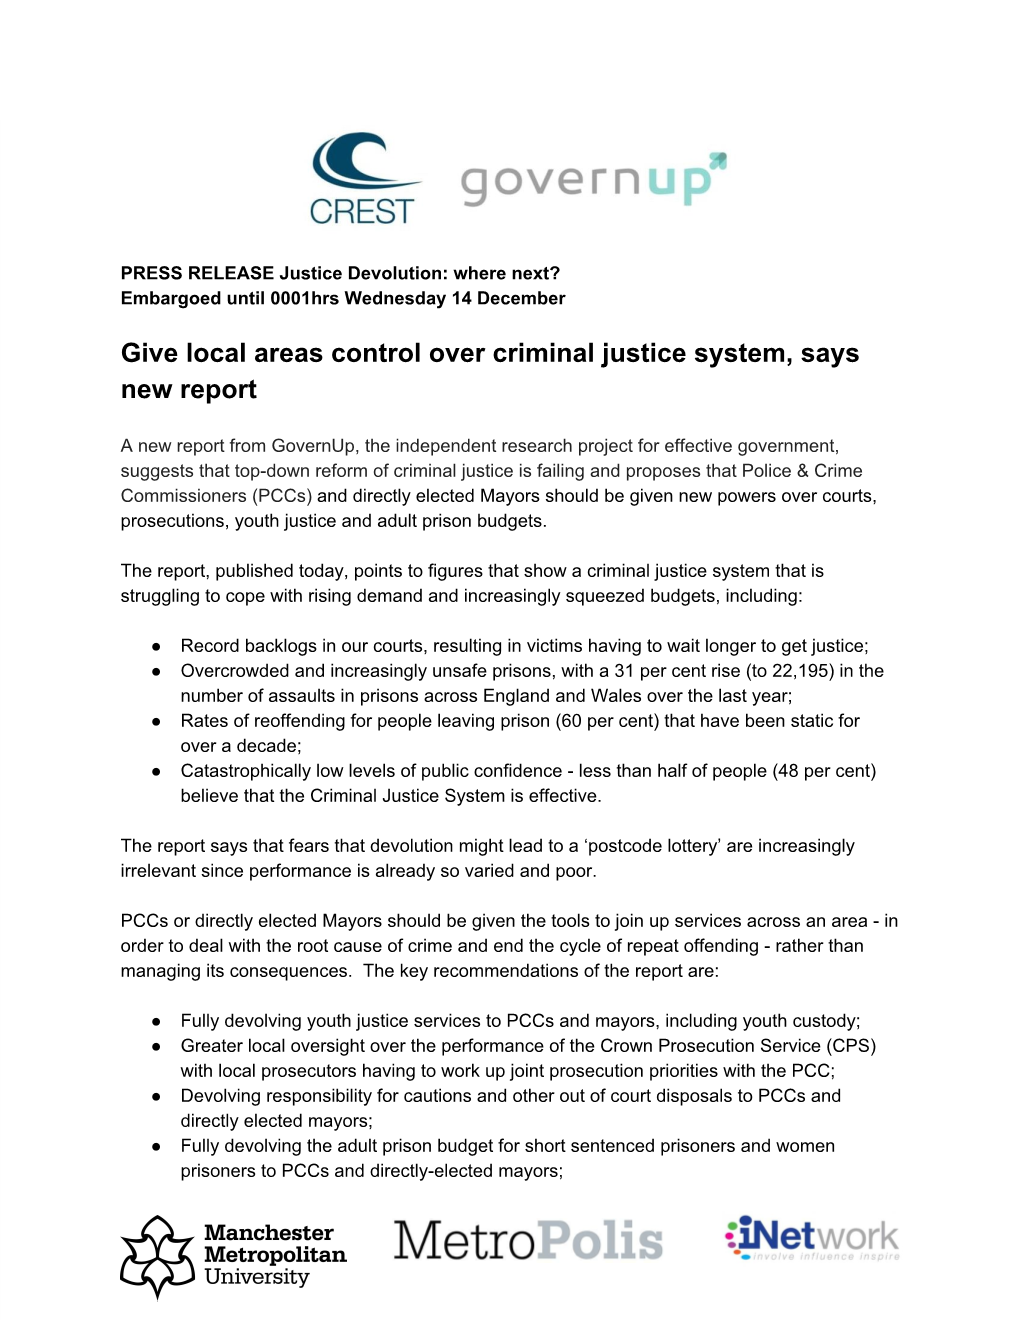 Give Local Areas Control Over Criminal Justice System, Says New Report